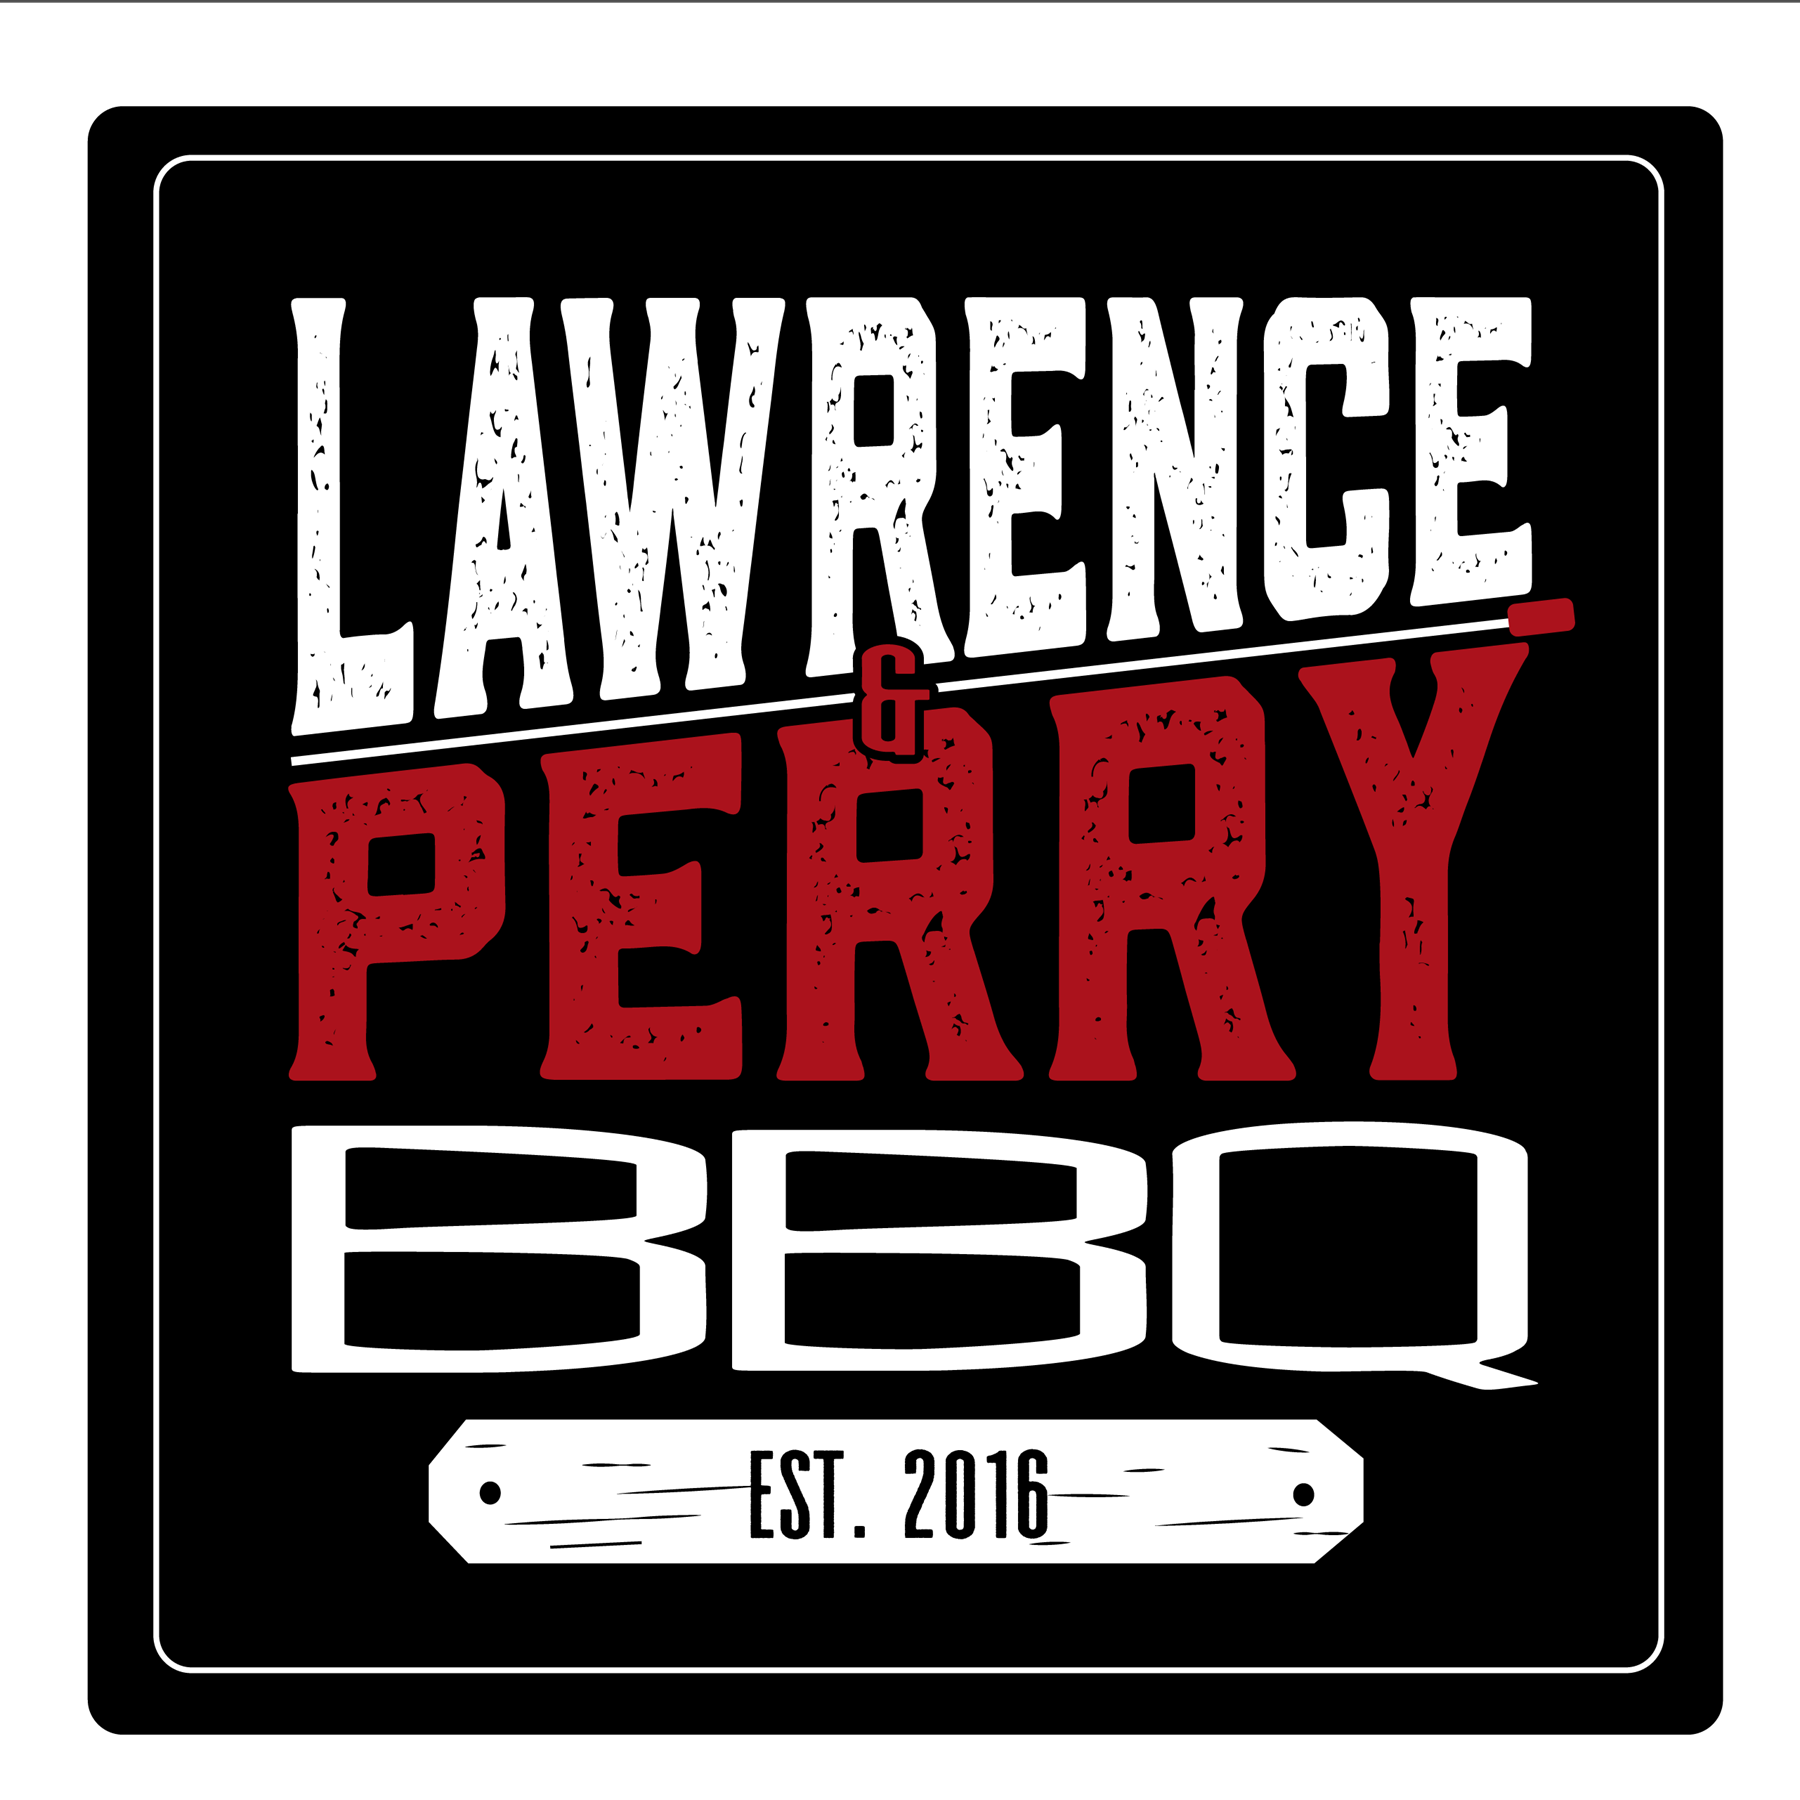 Lawrence & Perry Barbeque, LLC